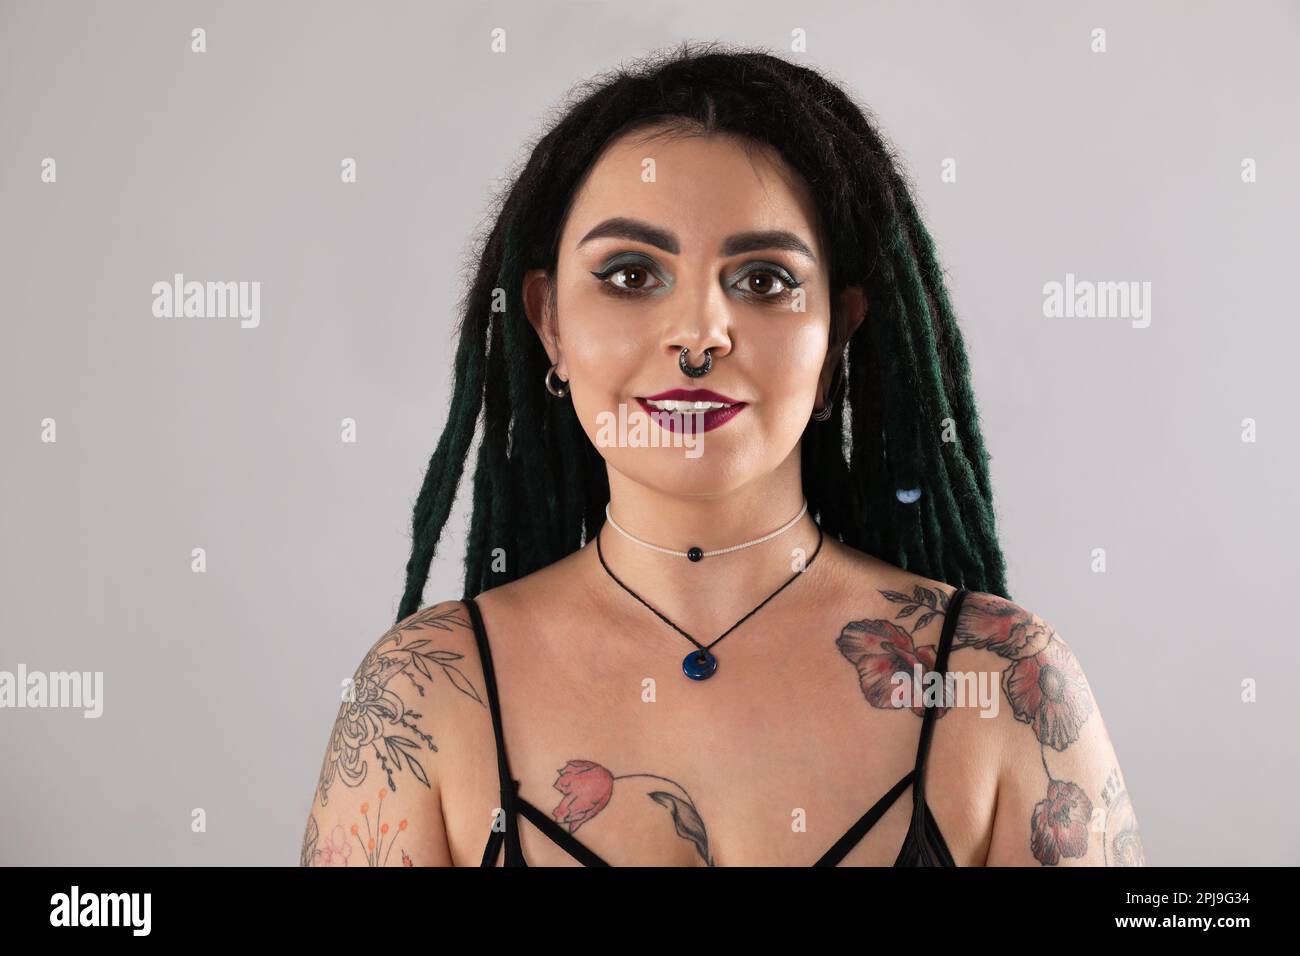 A Portrait of a Tattooed Woman with a Nose Piercing · Free Stock Photo